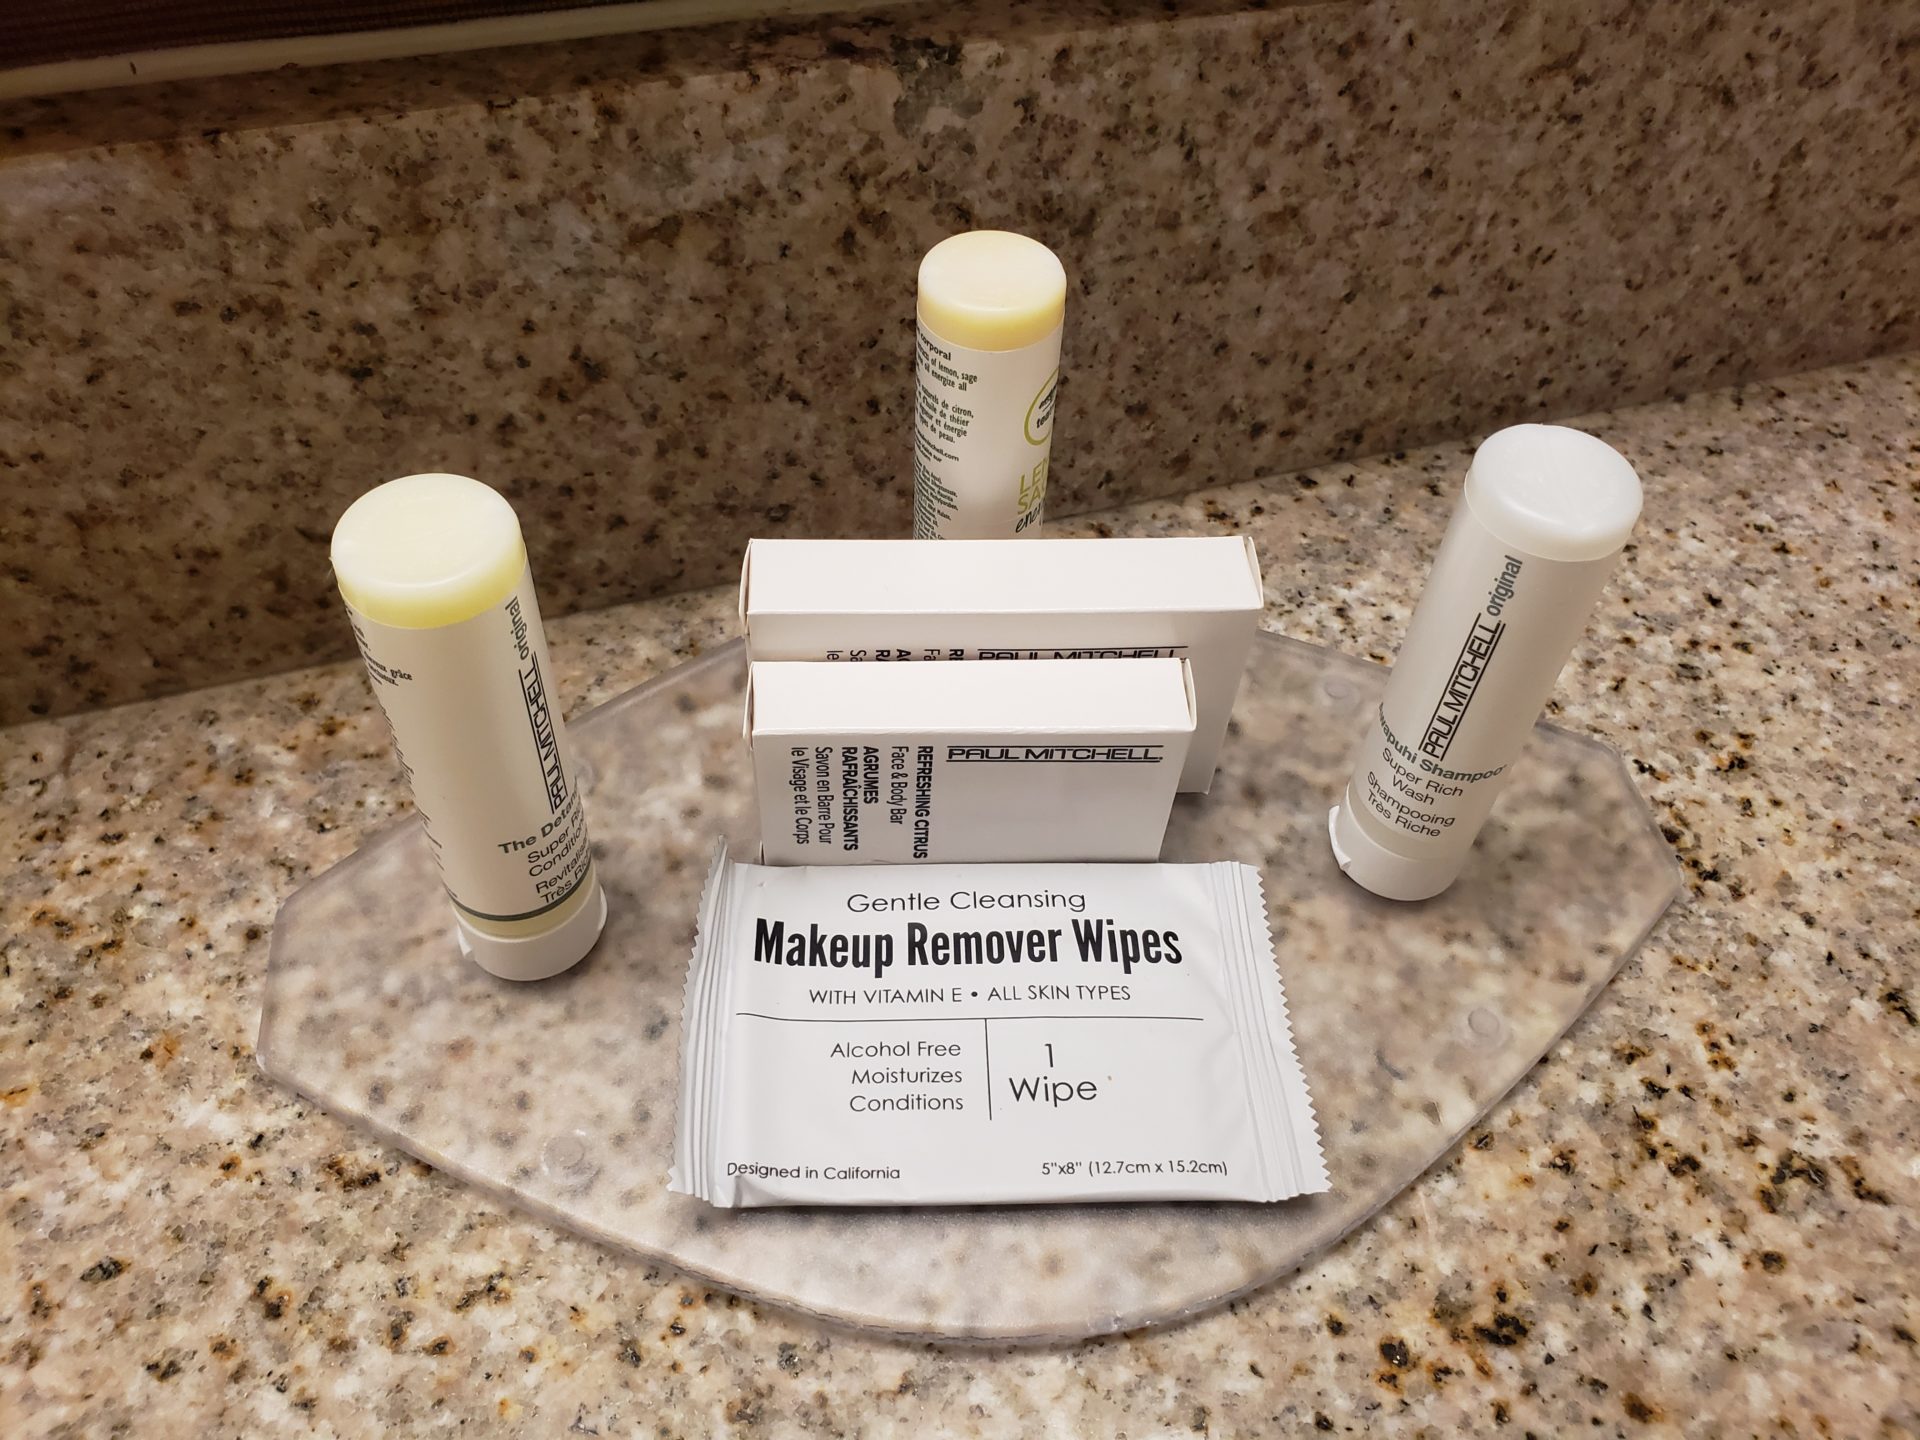 a group of wipes and a package of makeup remover wipes